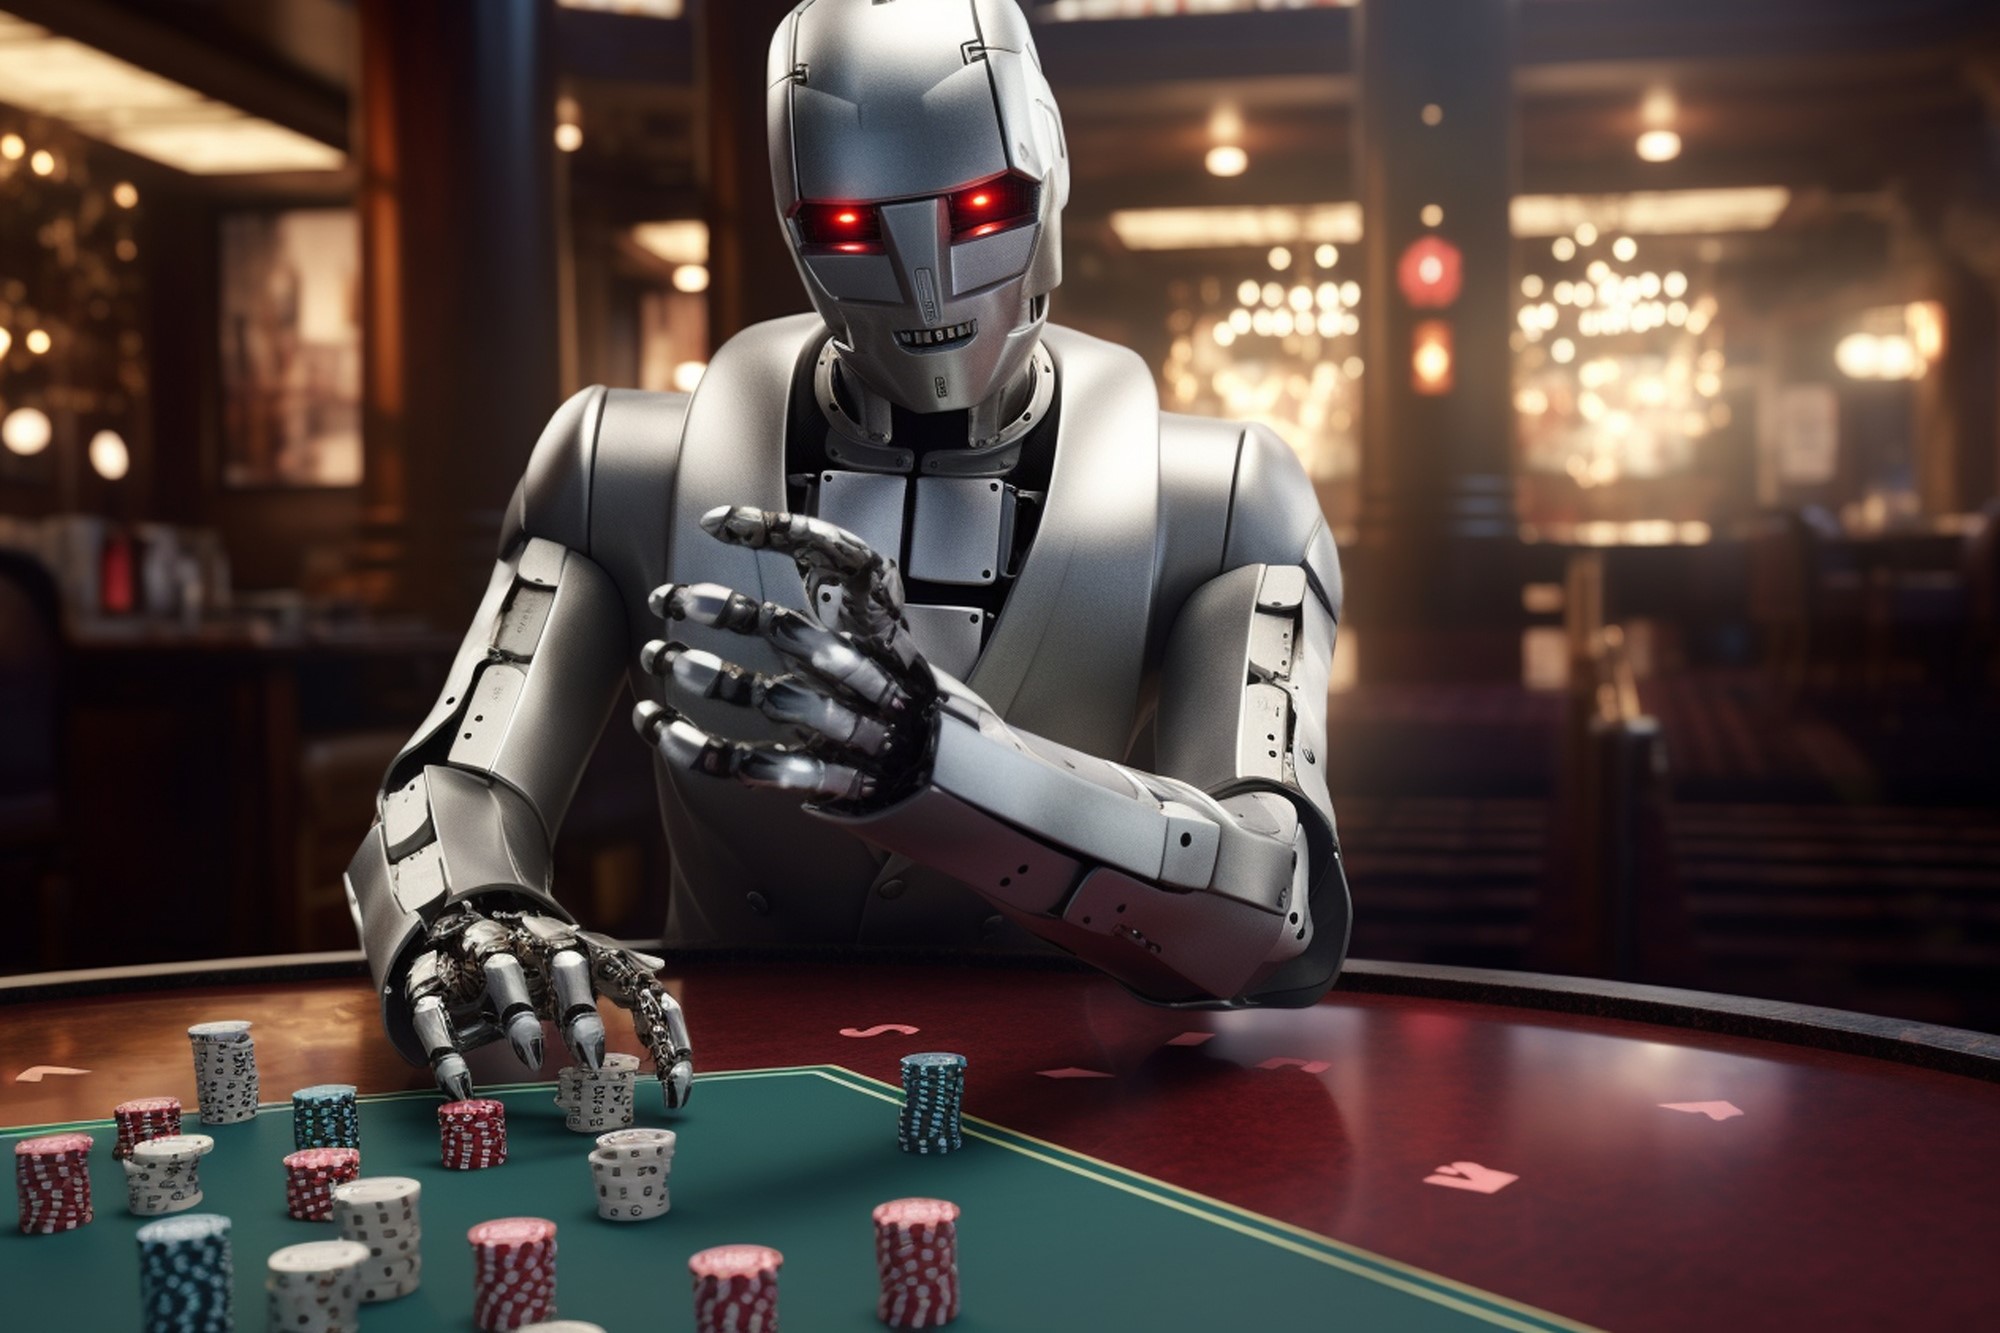 The Role of Artificial Intelligence in Casinos